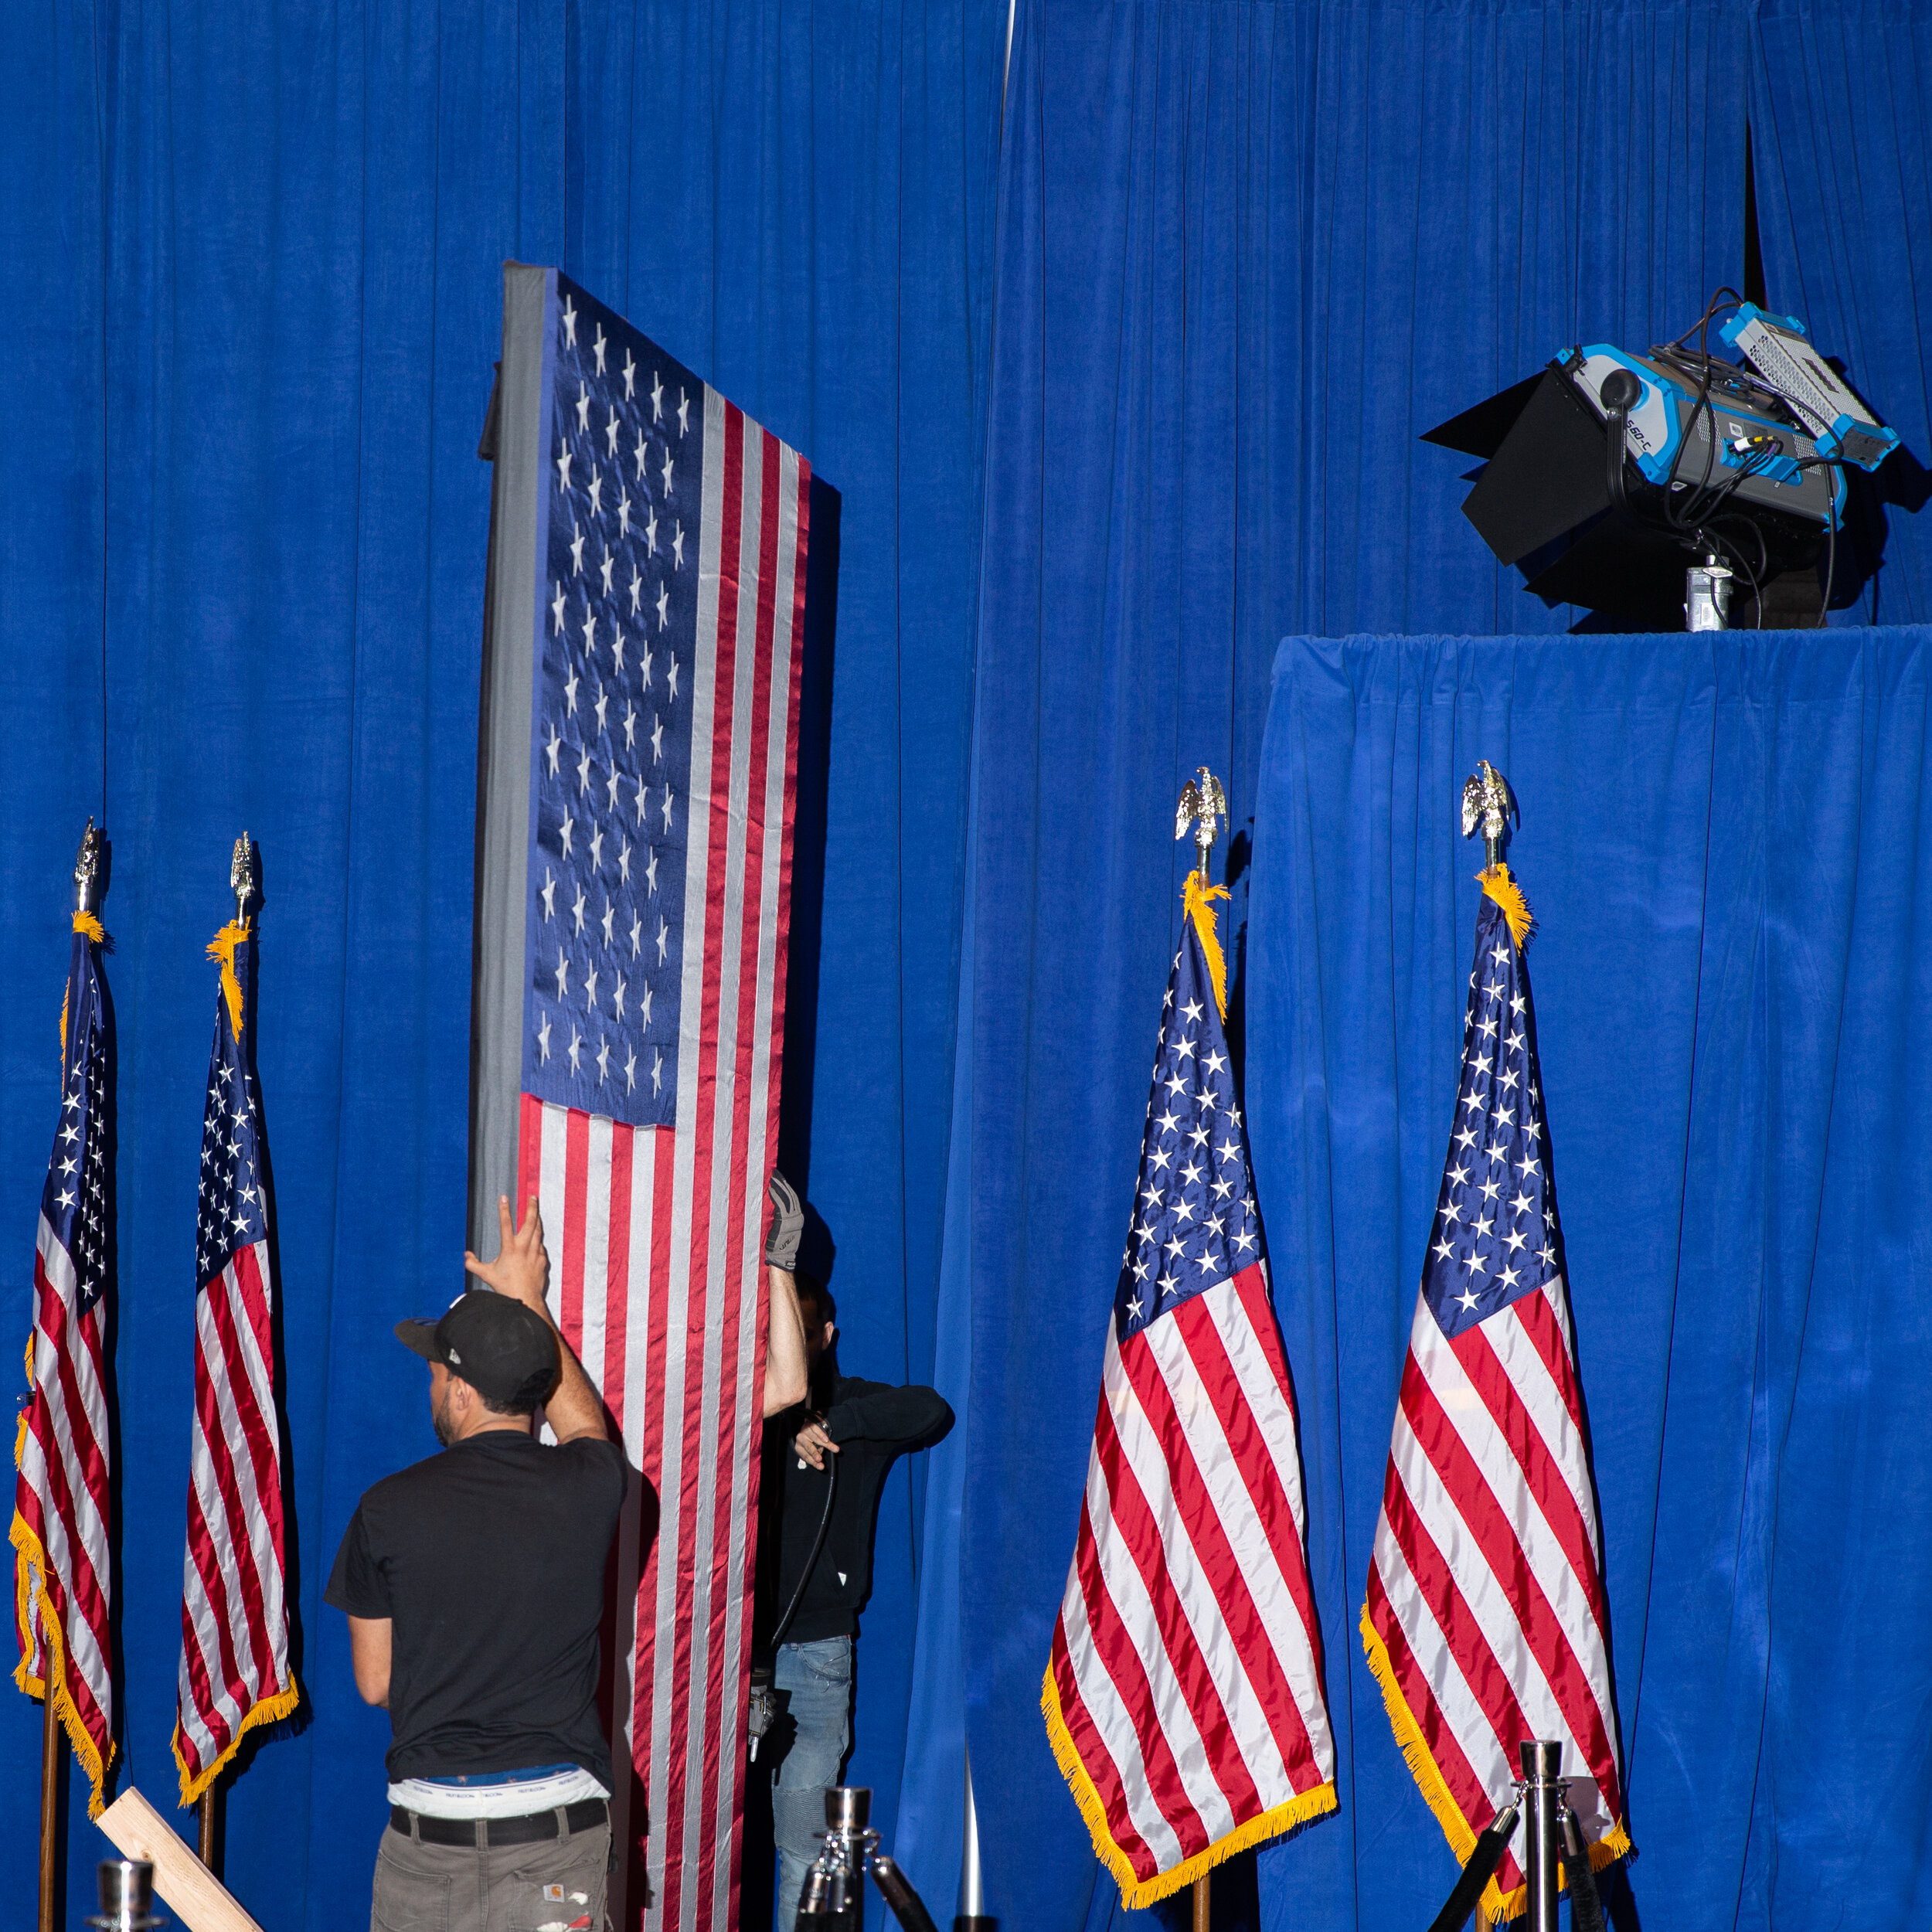 Staff breakdown props at Michael Bloomberg's final campaign appearance. This event was one of the last in-person events before campaigning came to a halt due to COVID-19